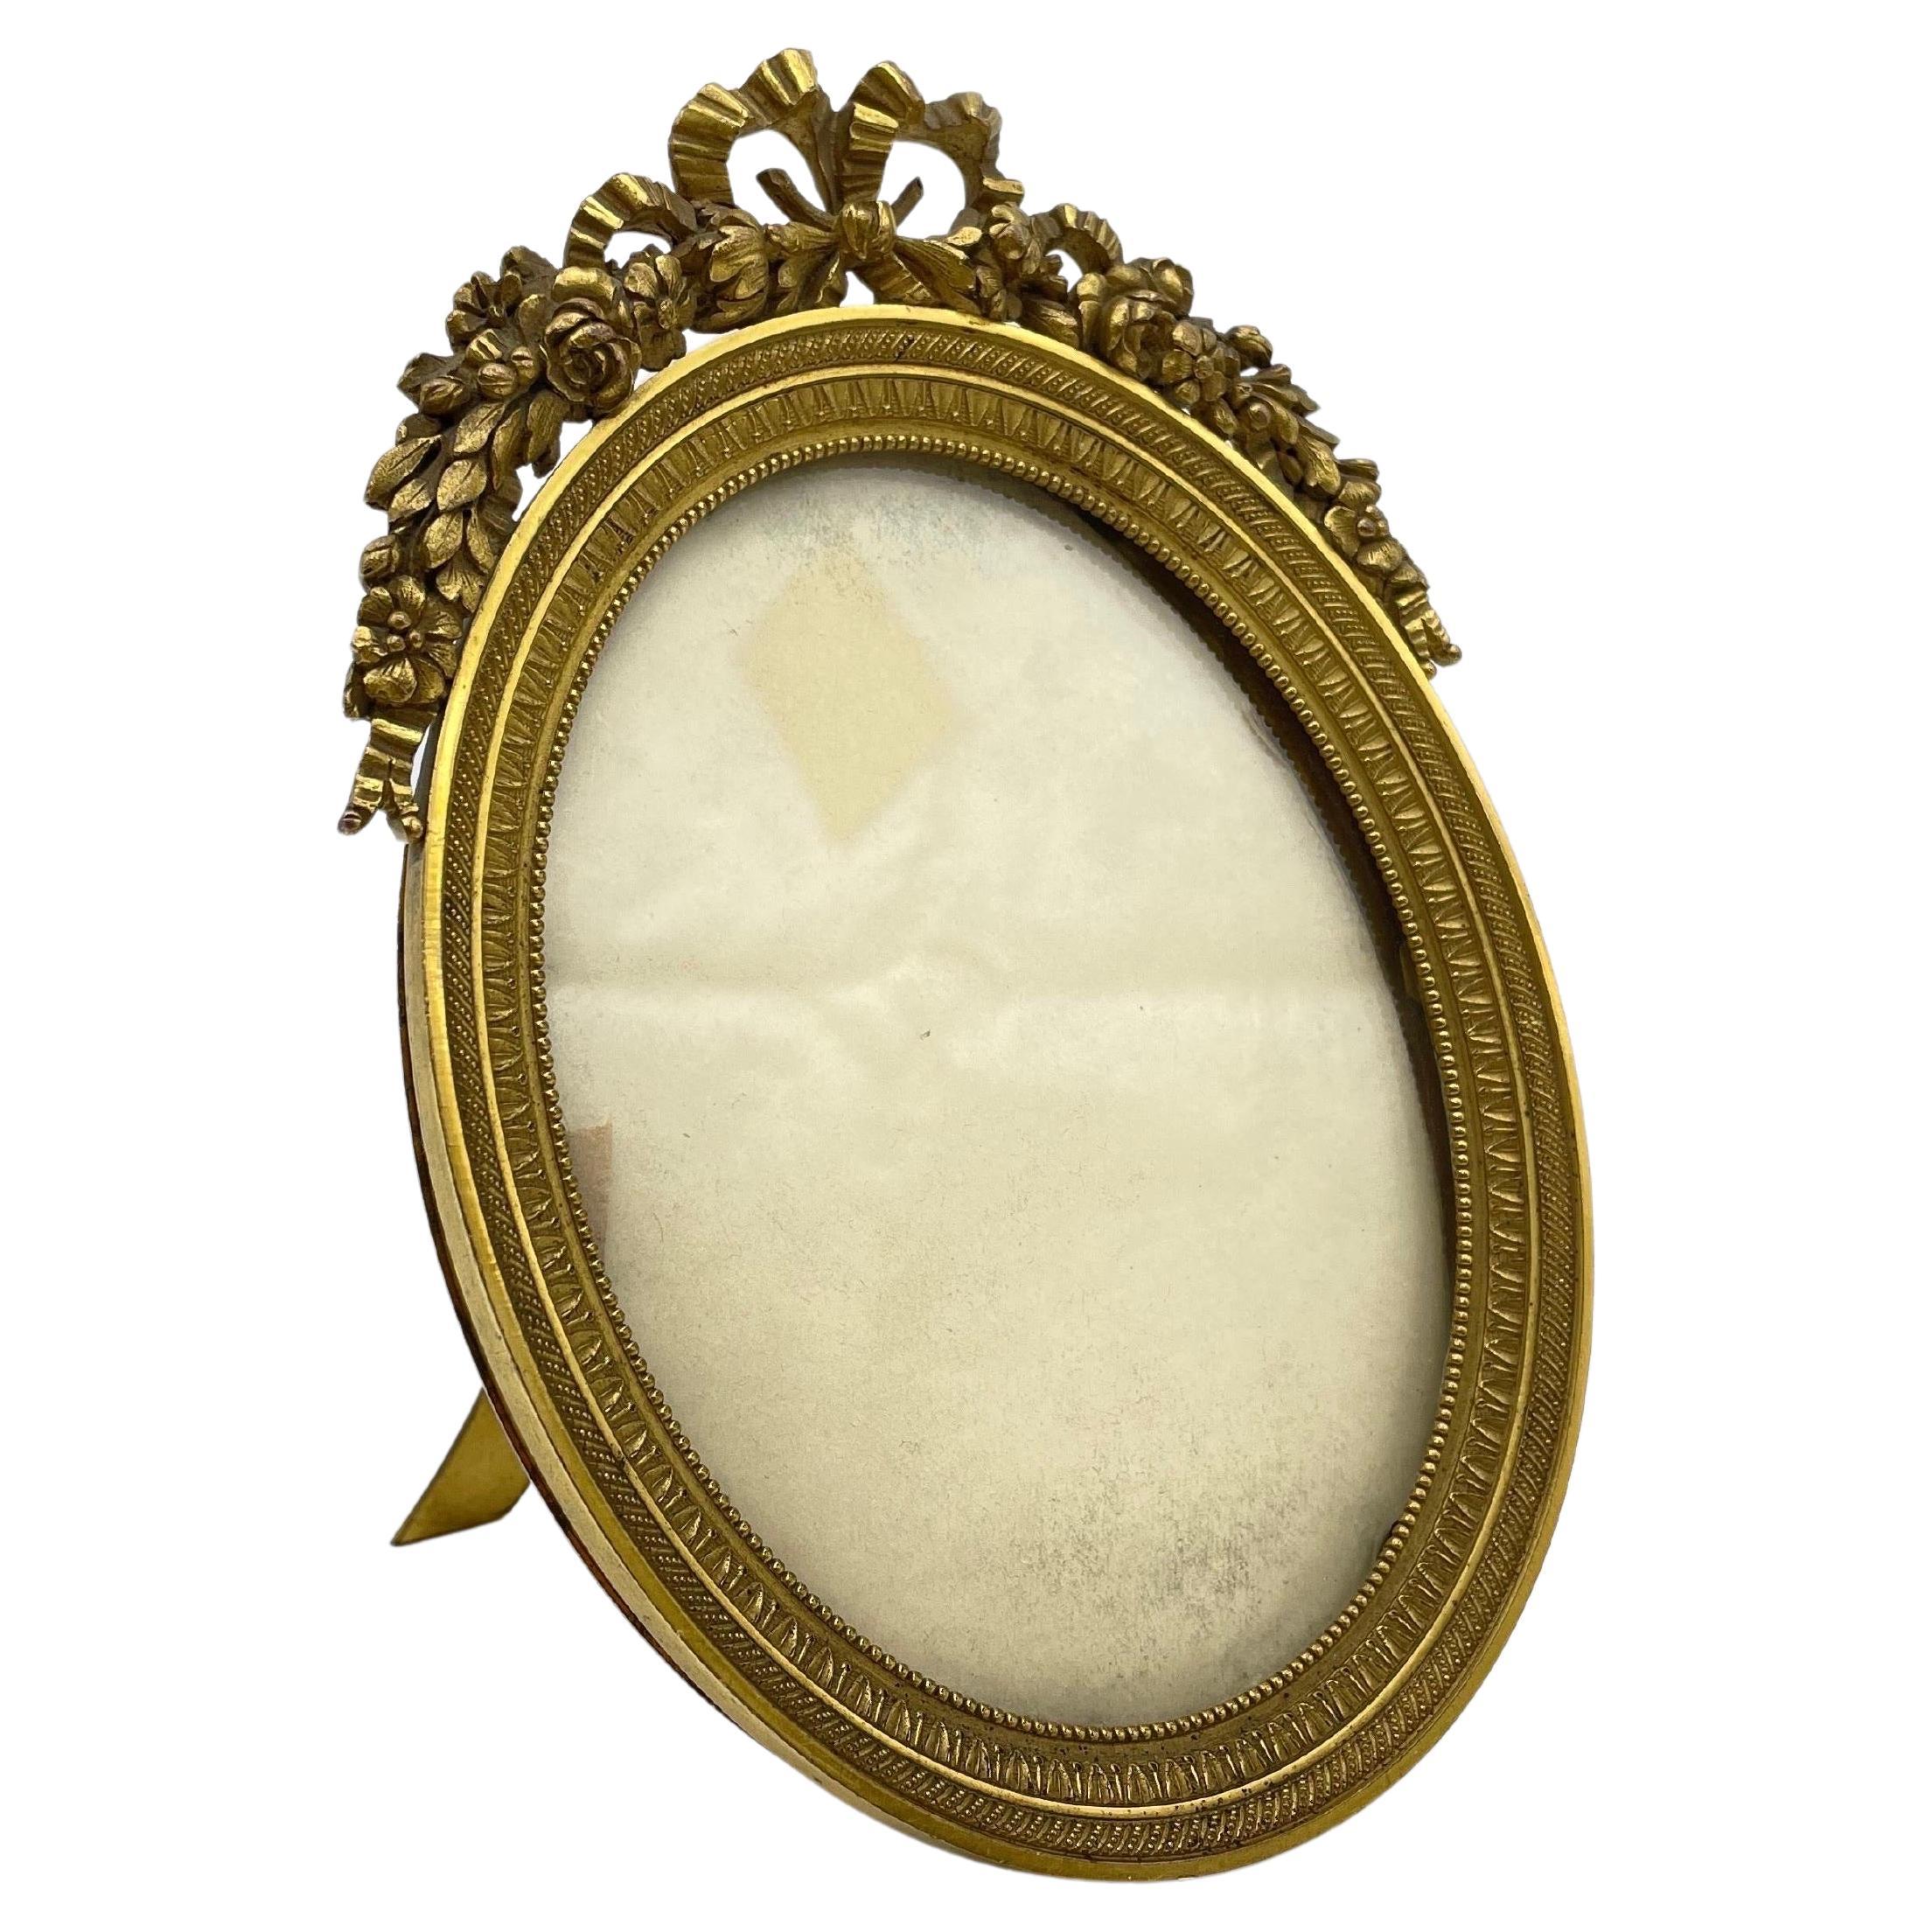 Noble Empire table picture frame, Gold, Oval For Sale